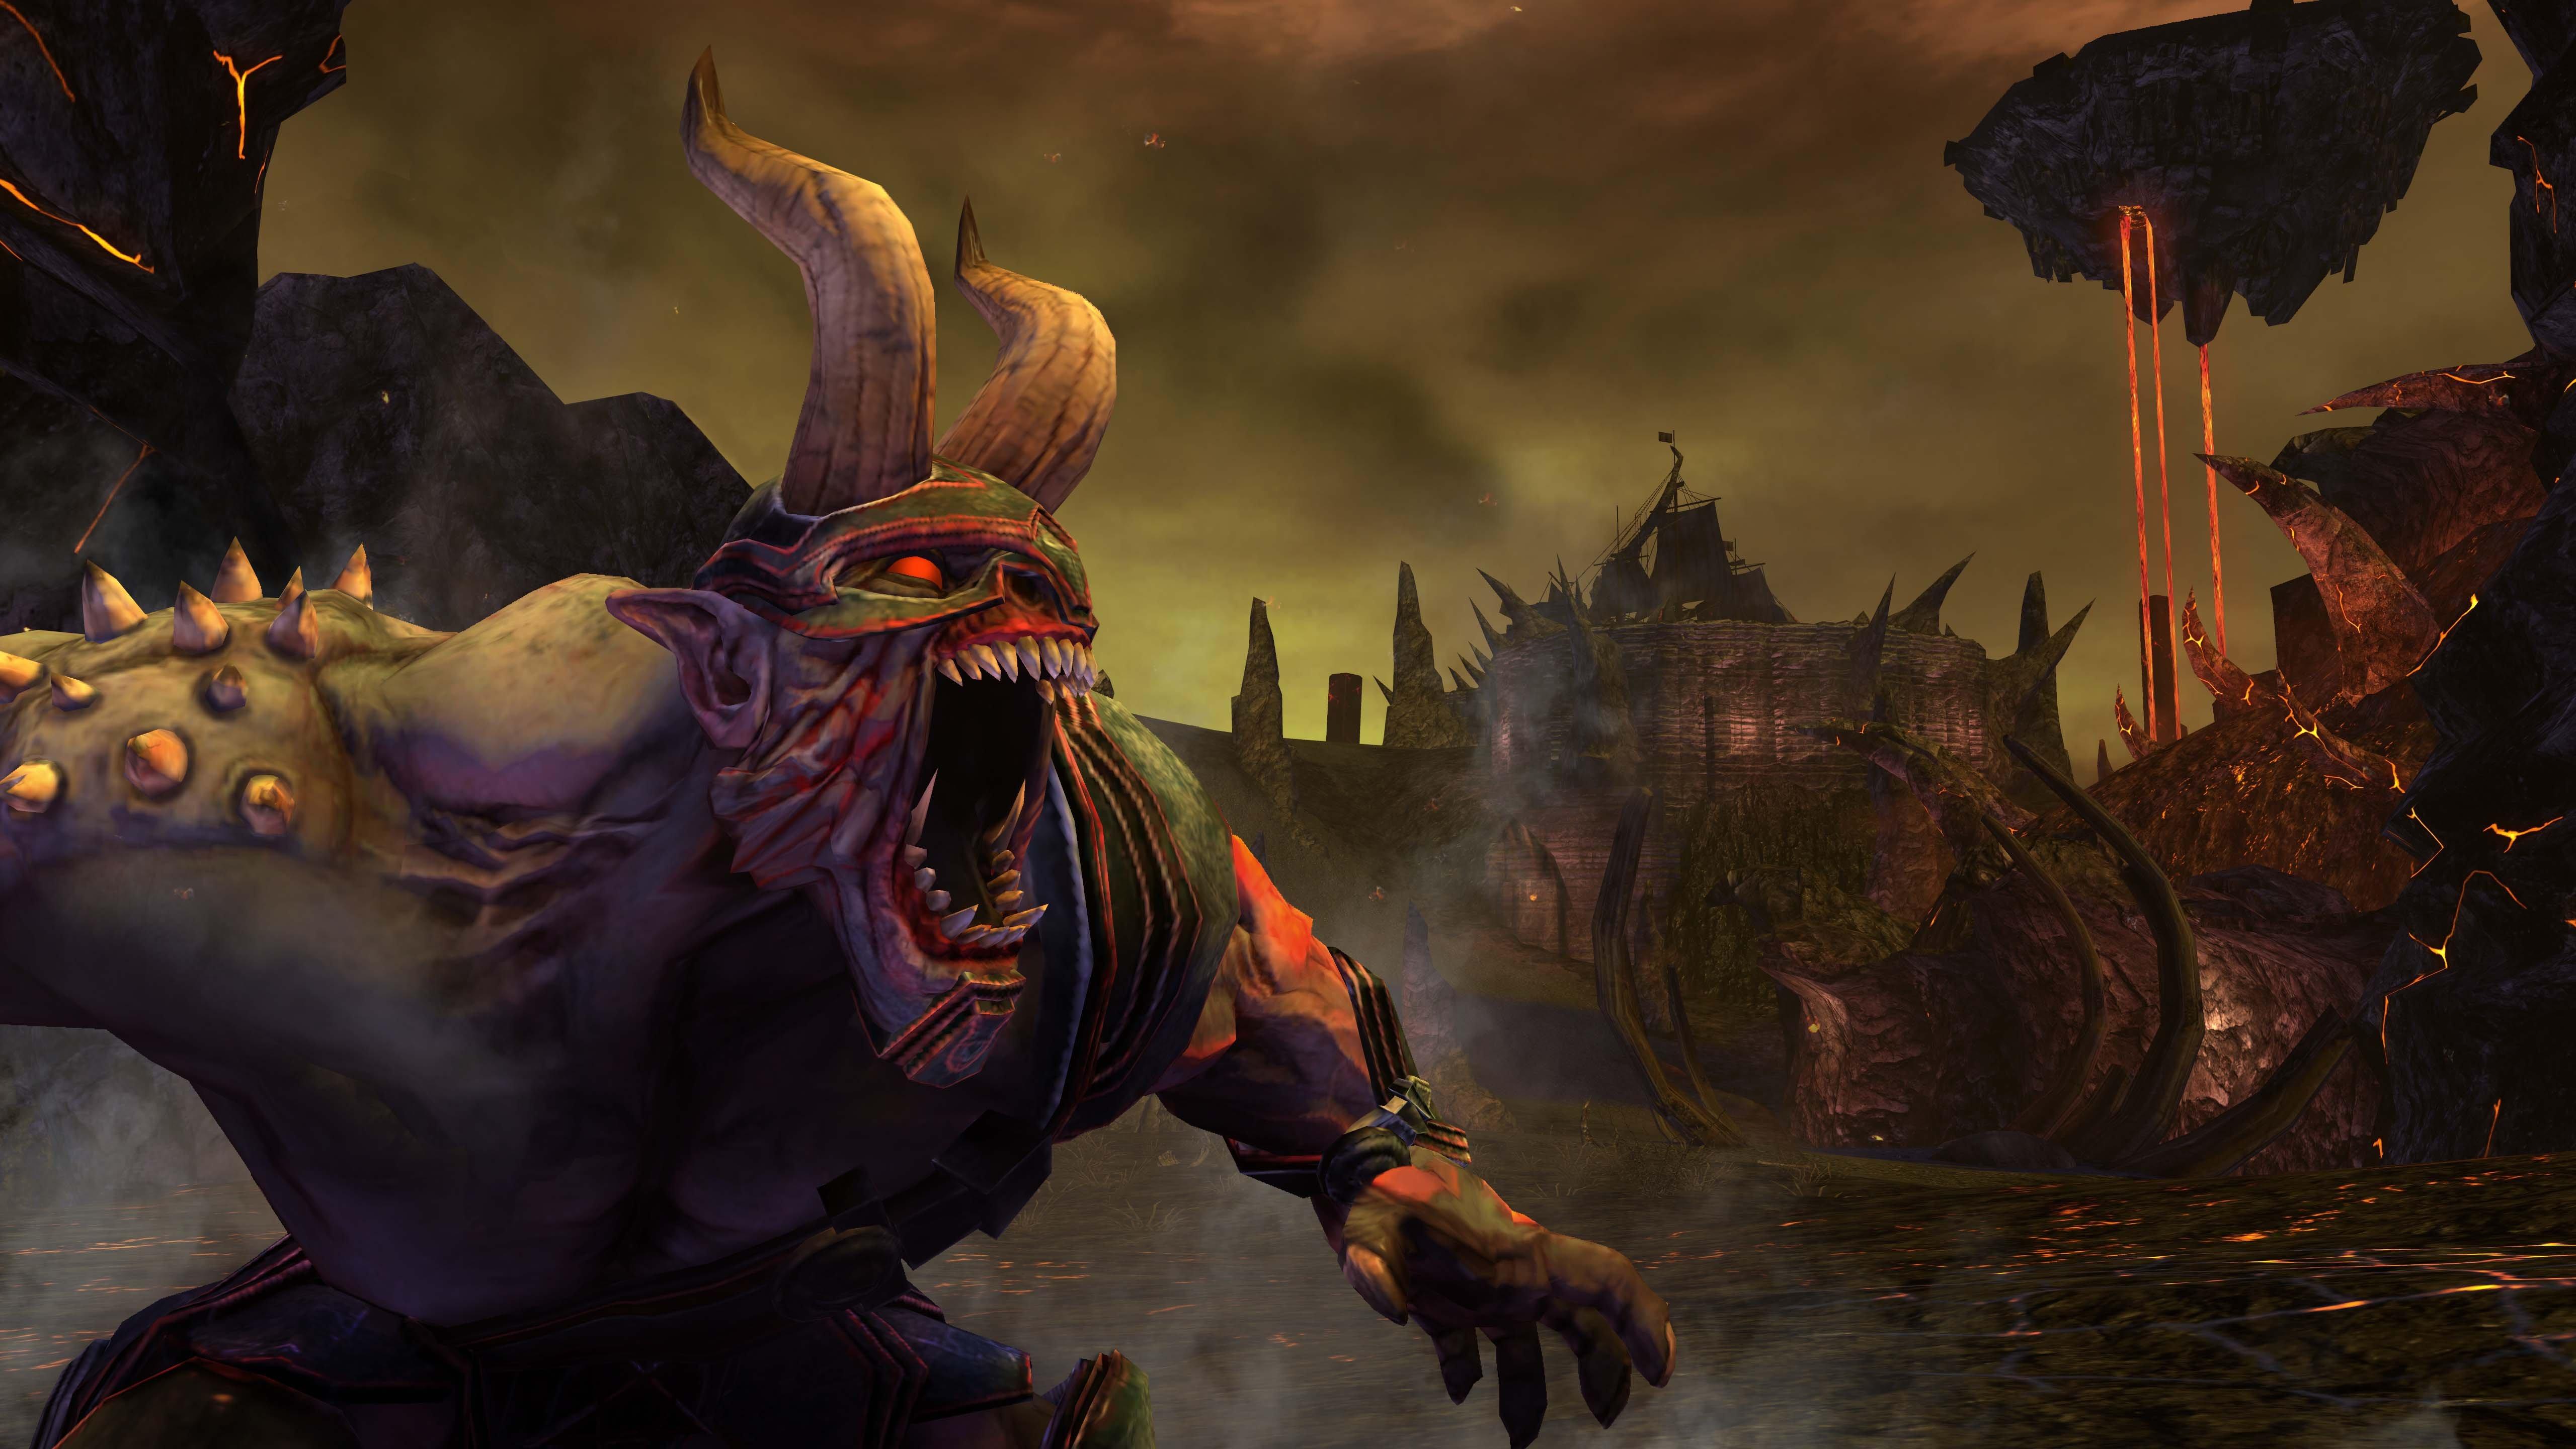 Buy Saints Row: Gat Out of Hell from the Humble Store